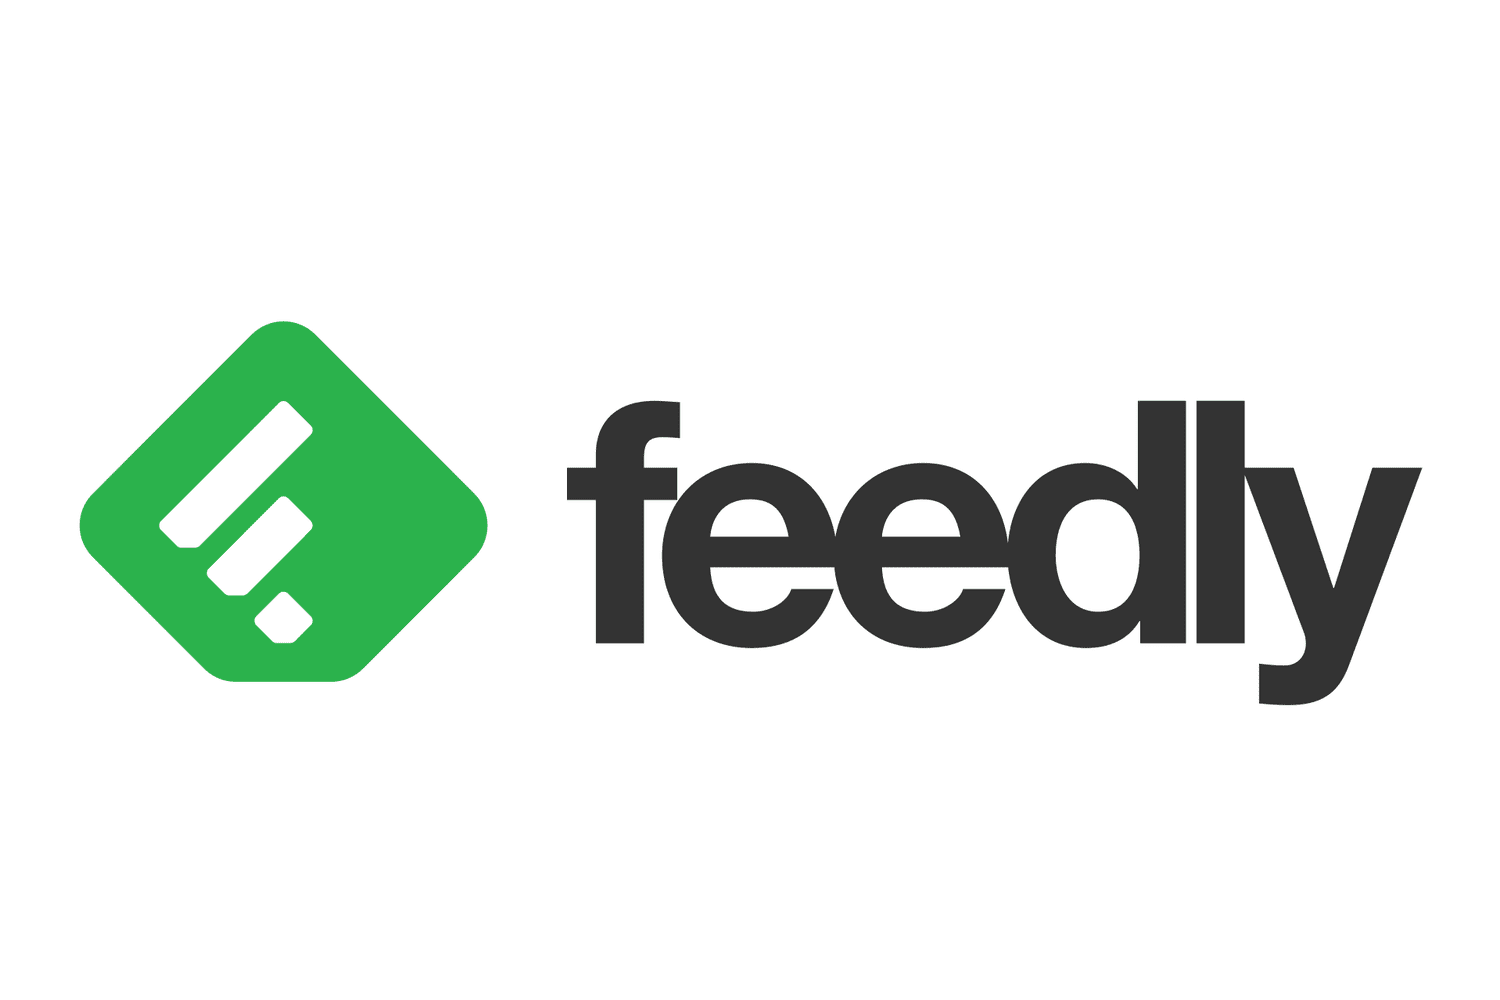 What Is Feedly?